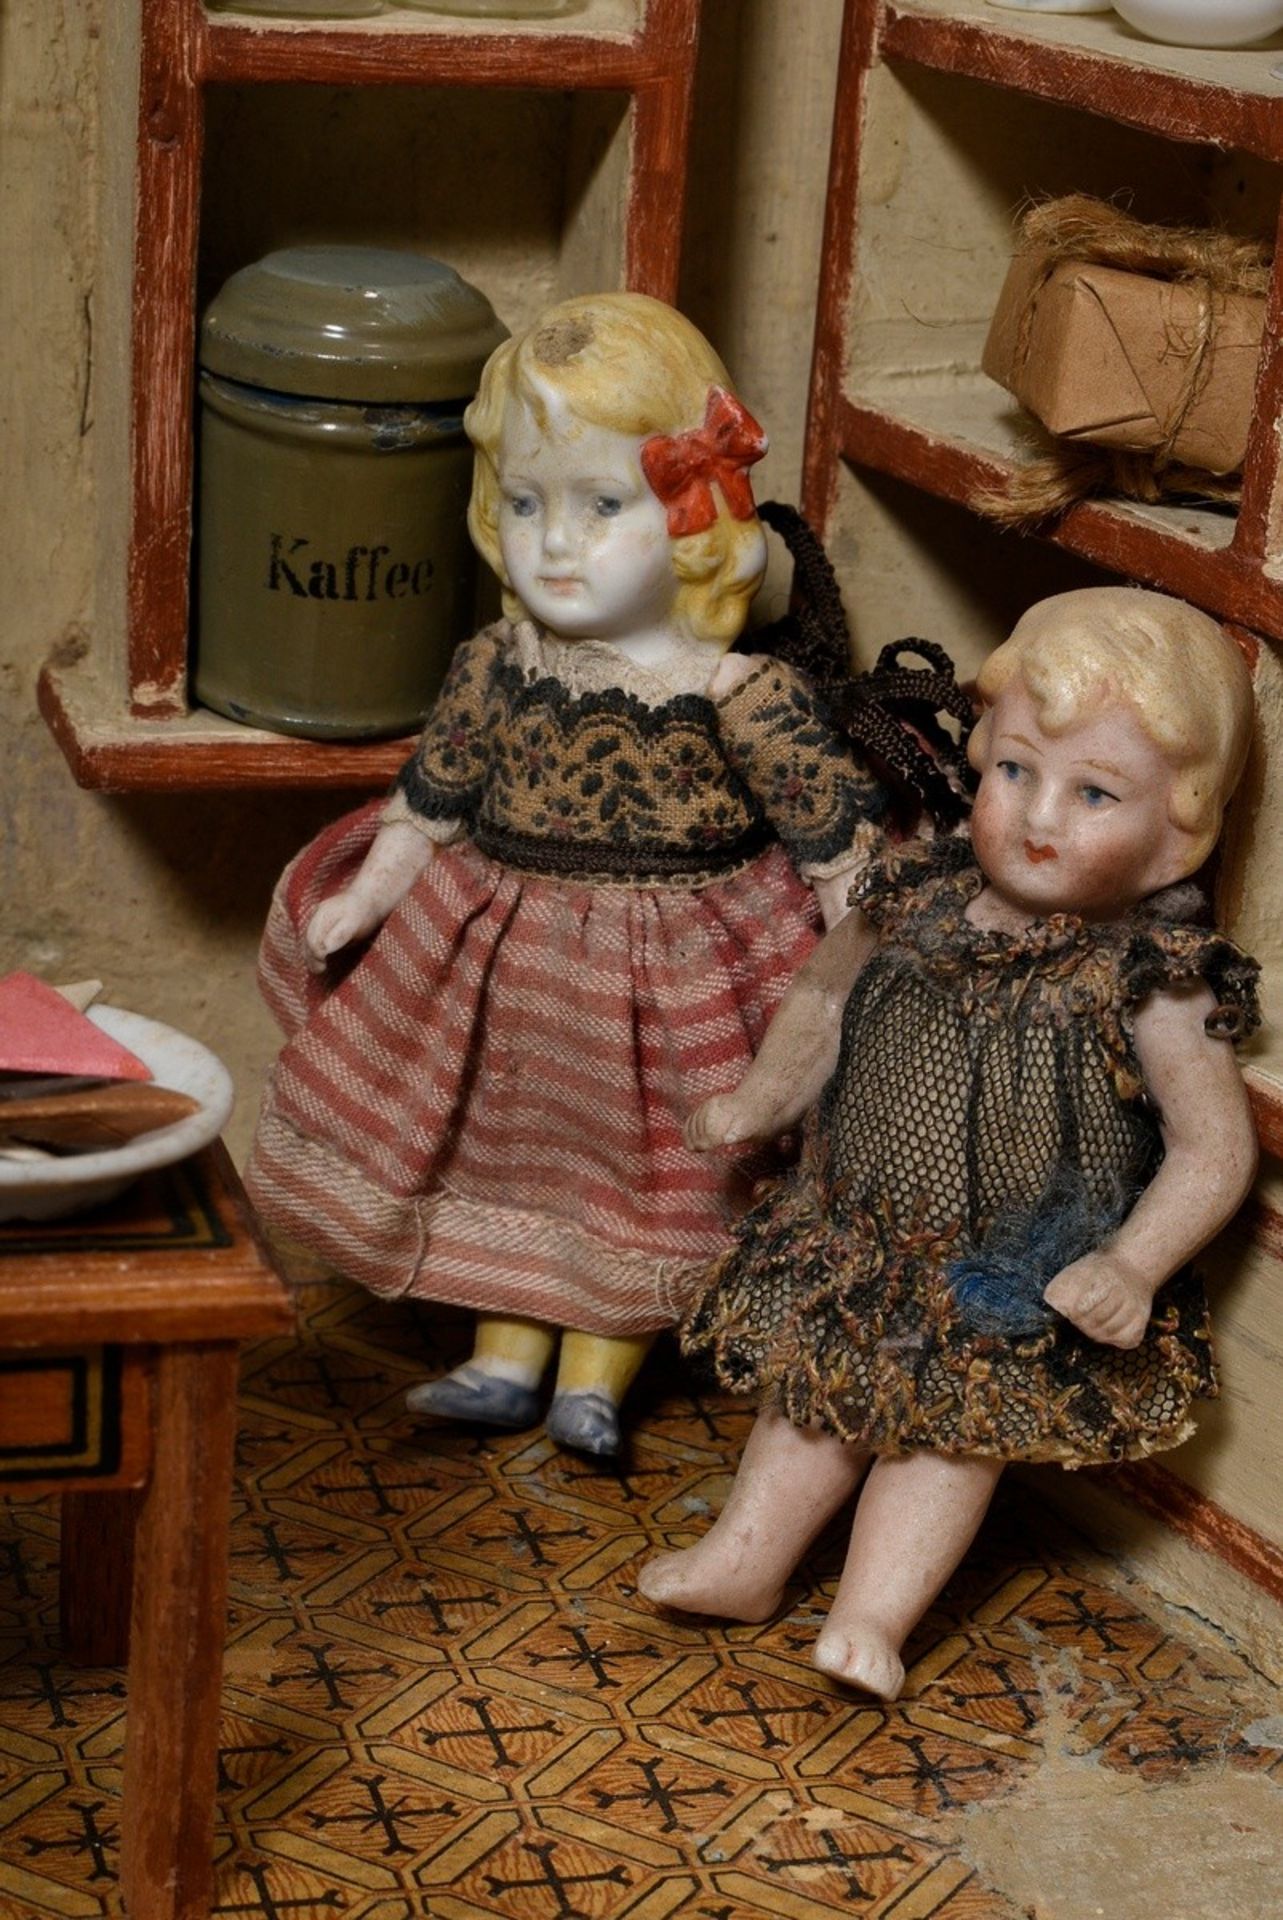 Dolls' shop with dolls and rich interior: e.g. pewter plates, glass bottles, porcelain jugs, around - Image 4 of 14